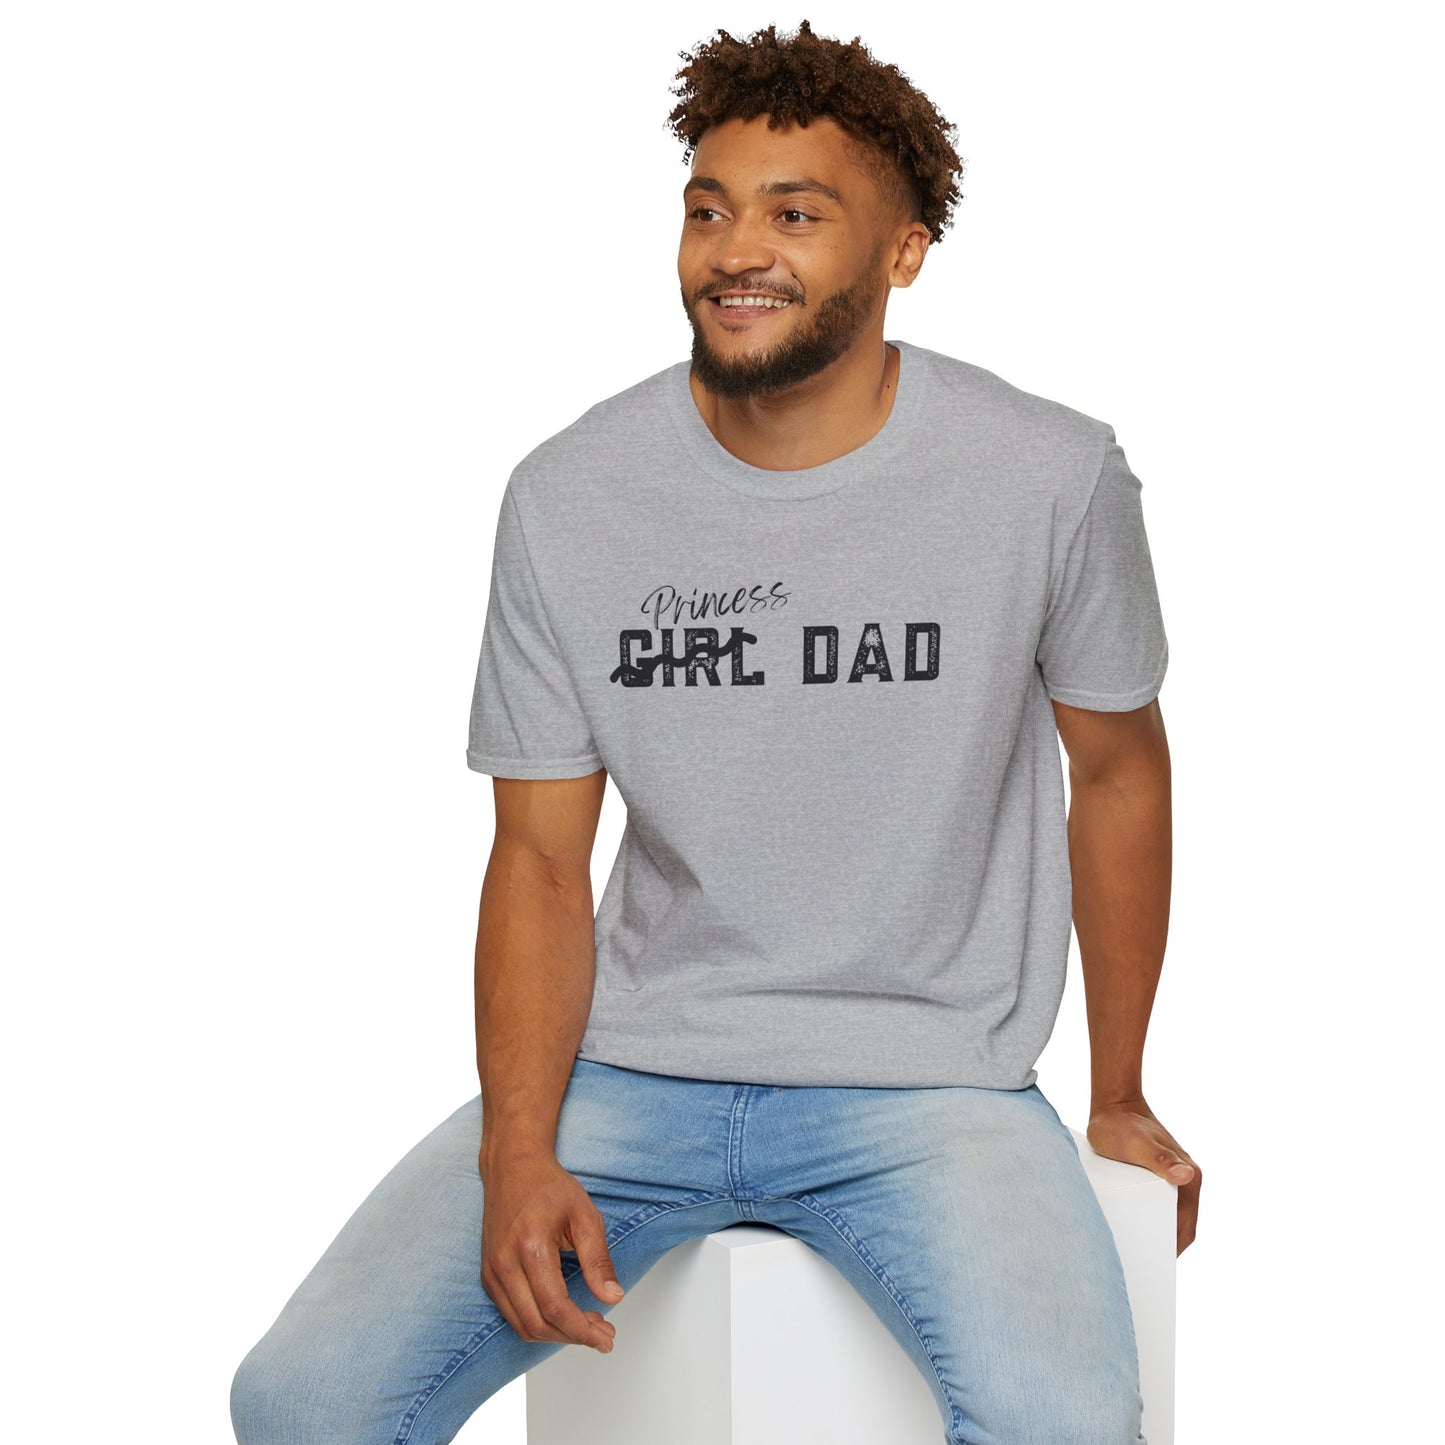 Girl Dad T-Shirt - Unisex Soft-Style Tee with Lightweight, Comfortable Fit